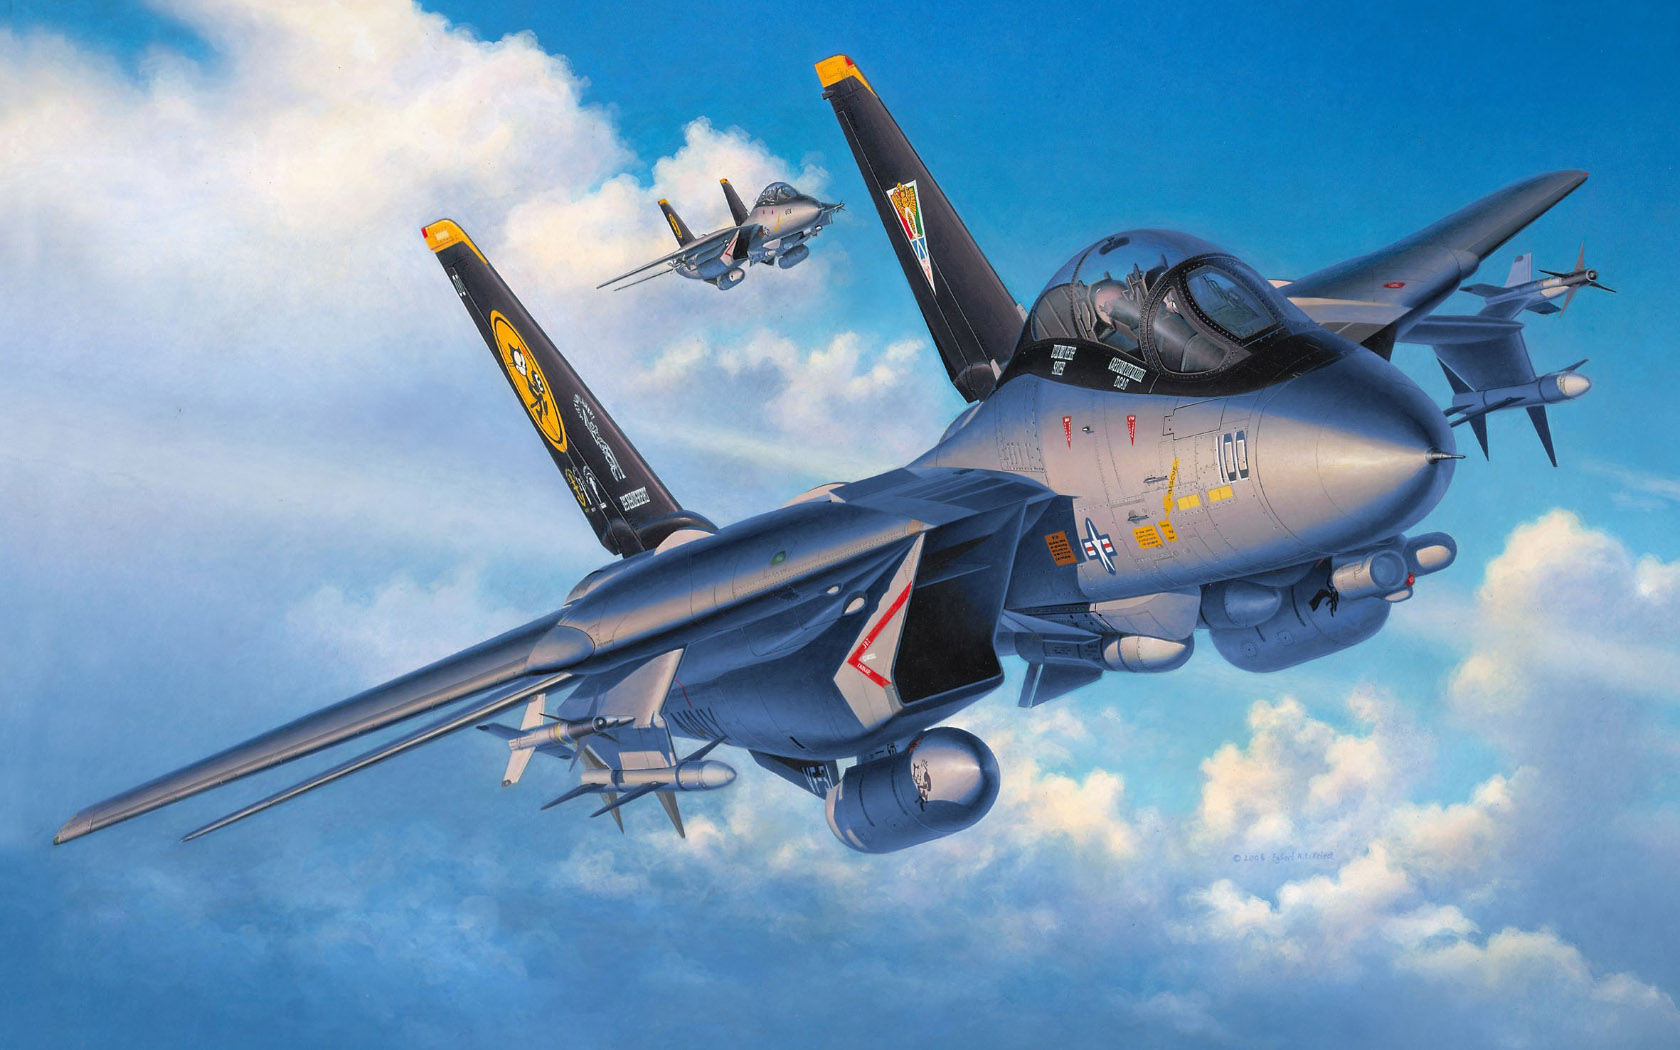 General 1680x1050 aircraft flying sky military clouds artwork F-14 Tomcat military aircraft jet fighter Egbert Friedl Boxart American aircraft missiles pilot United States Navy